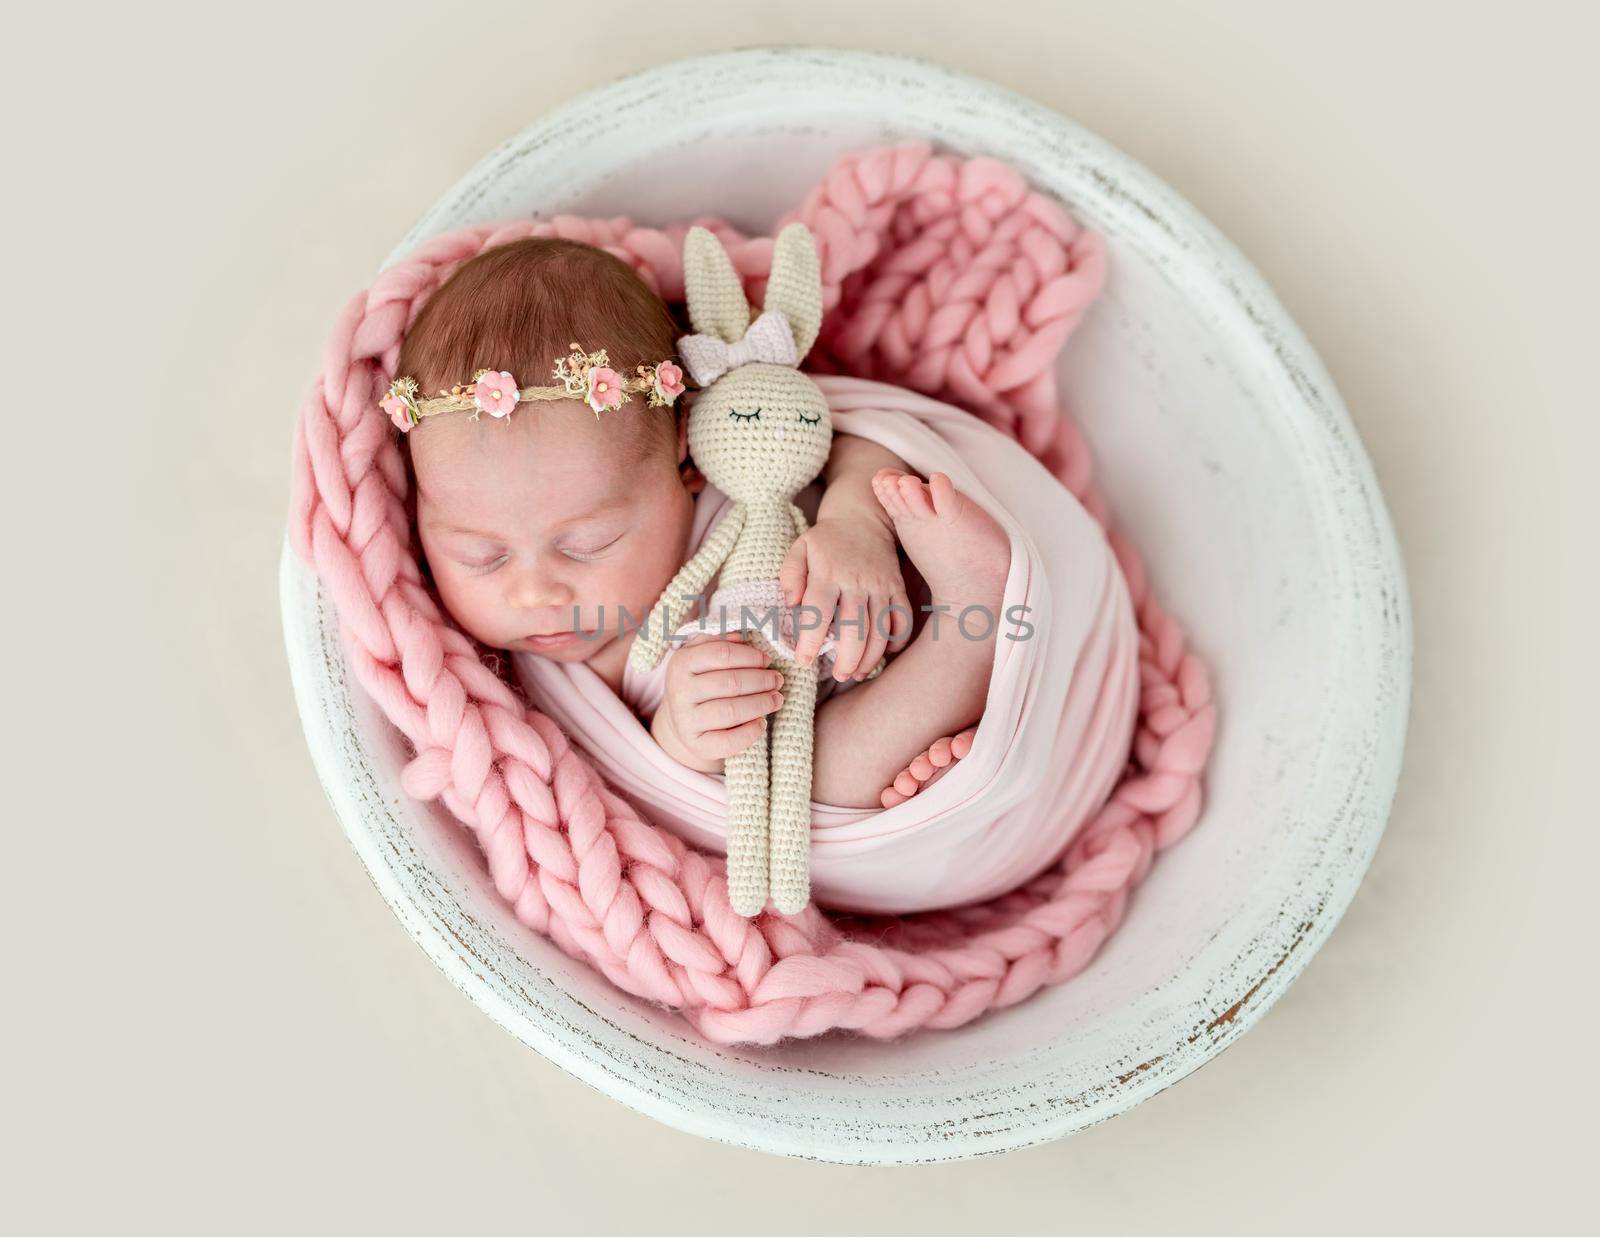 Lovely newborn sleeping with knitted toy